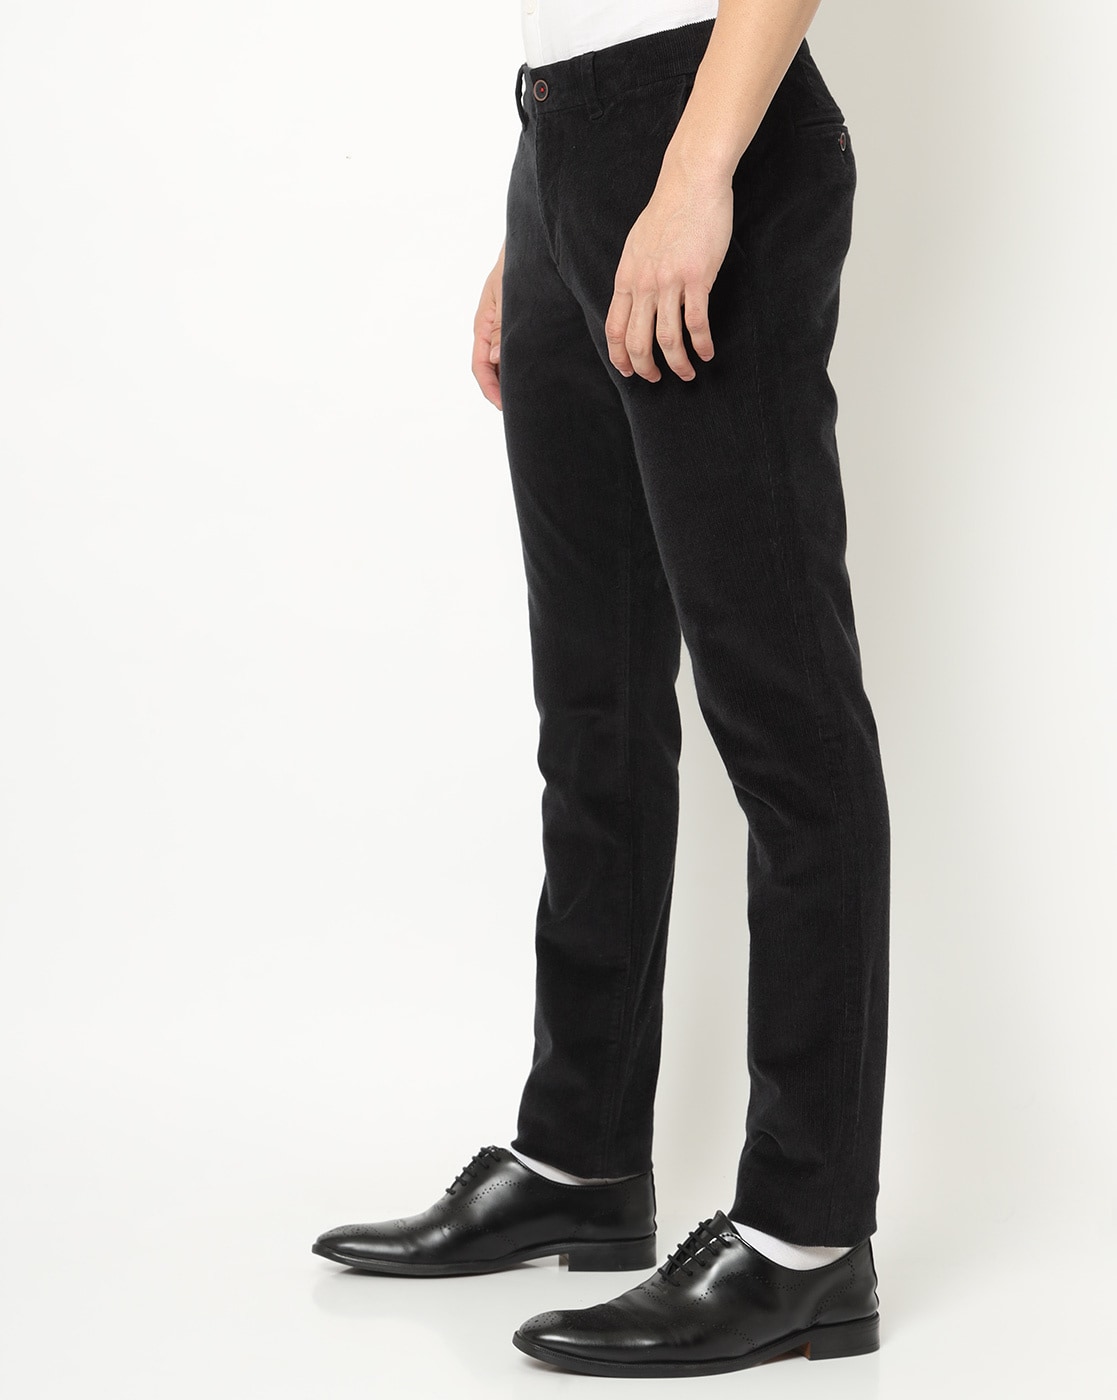 Corduroy Trousers in Black  207 products  FASHIOLAin